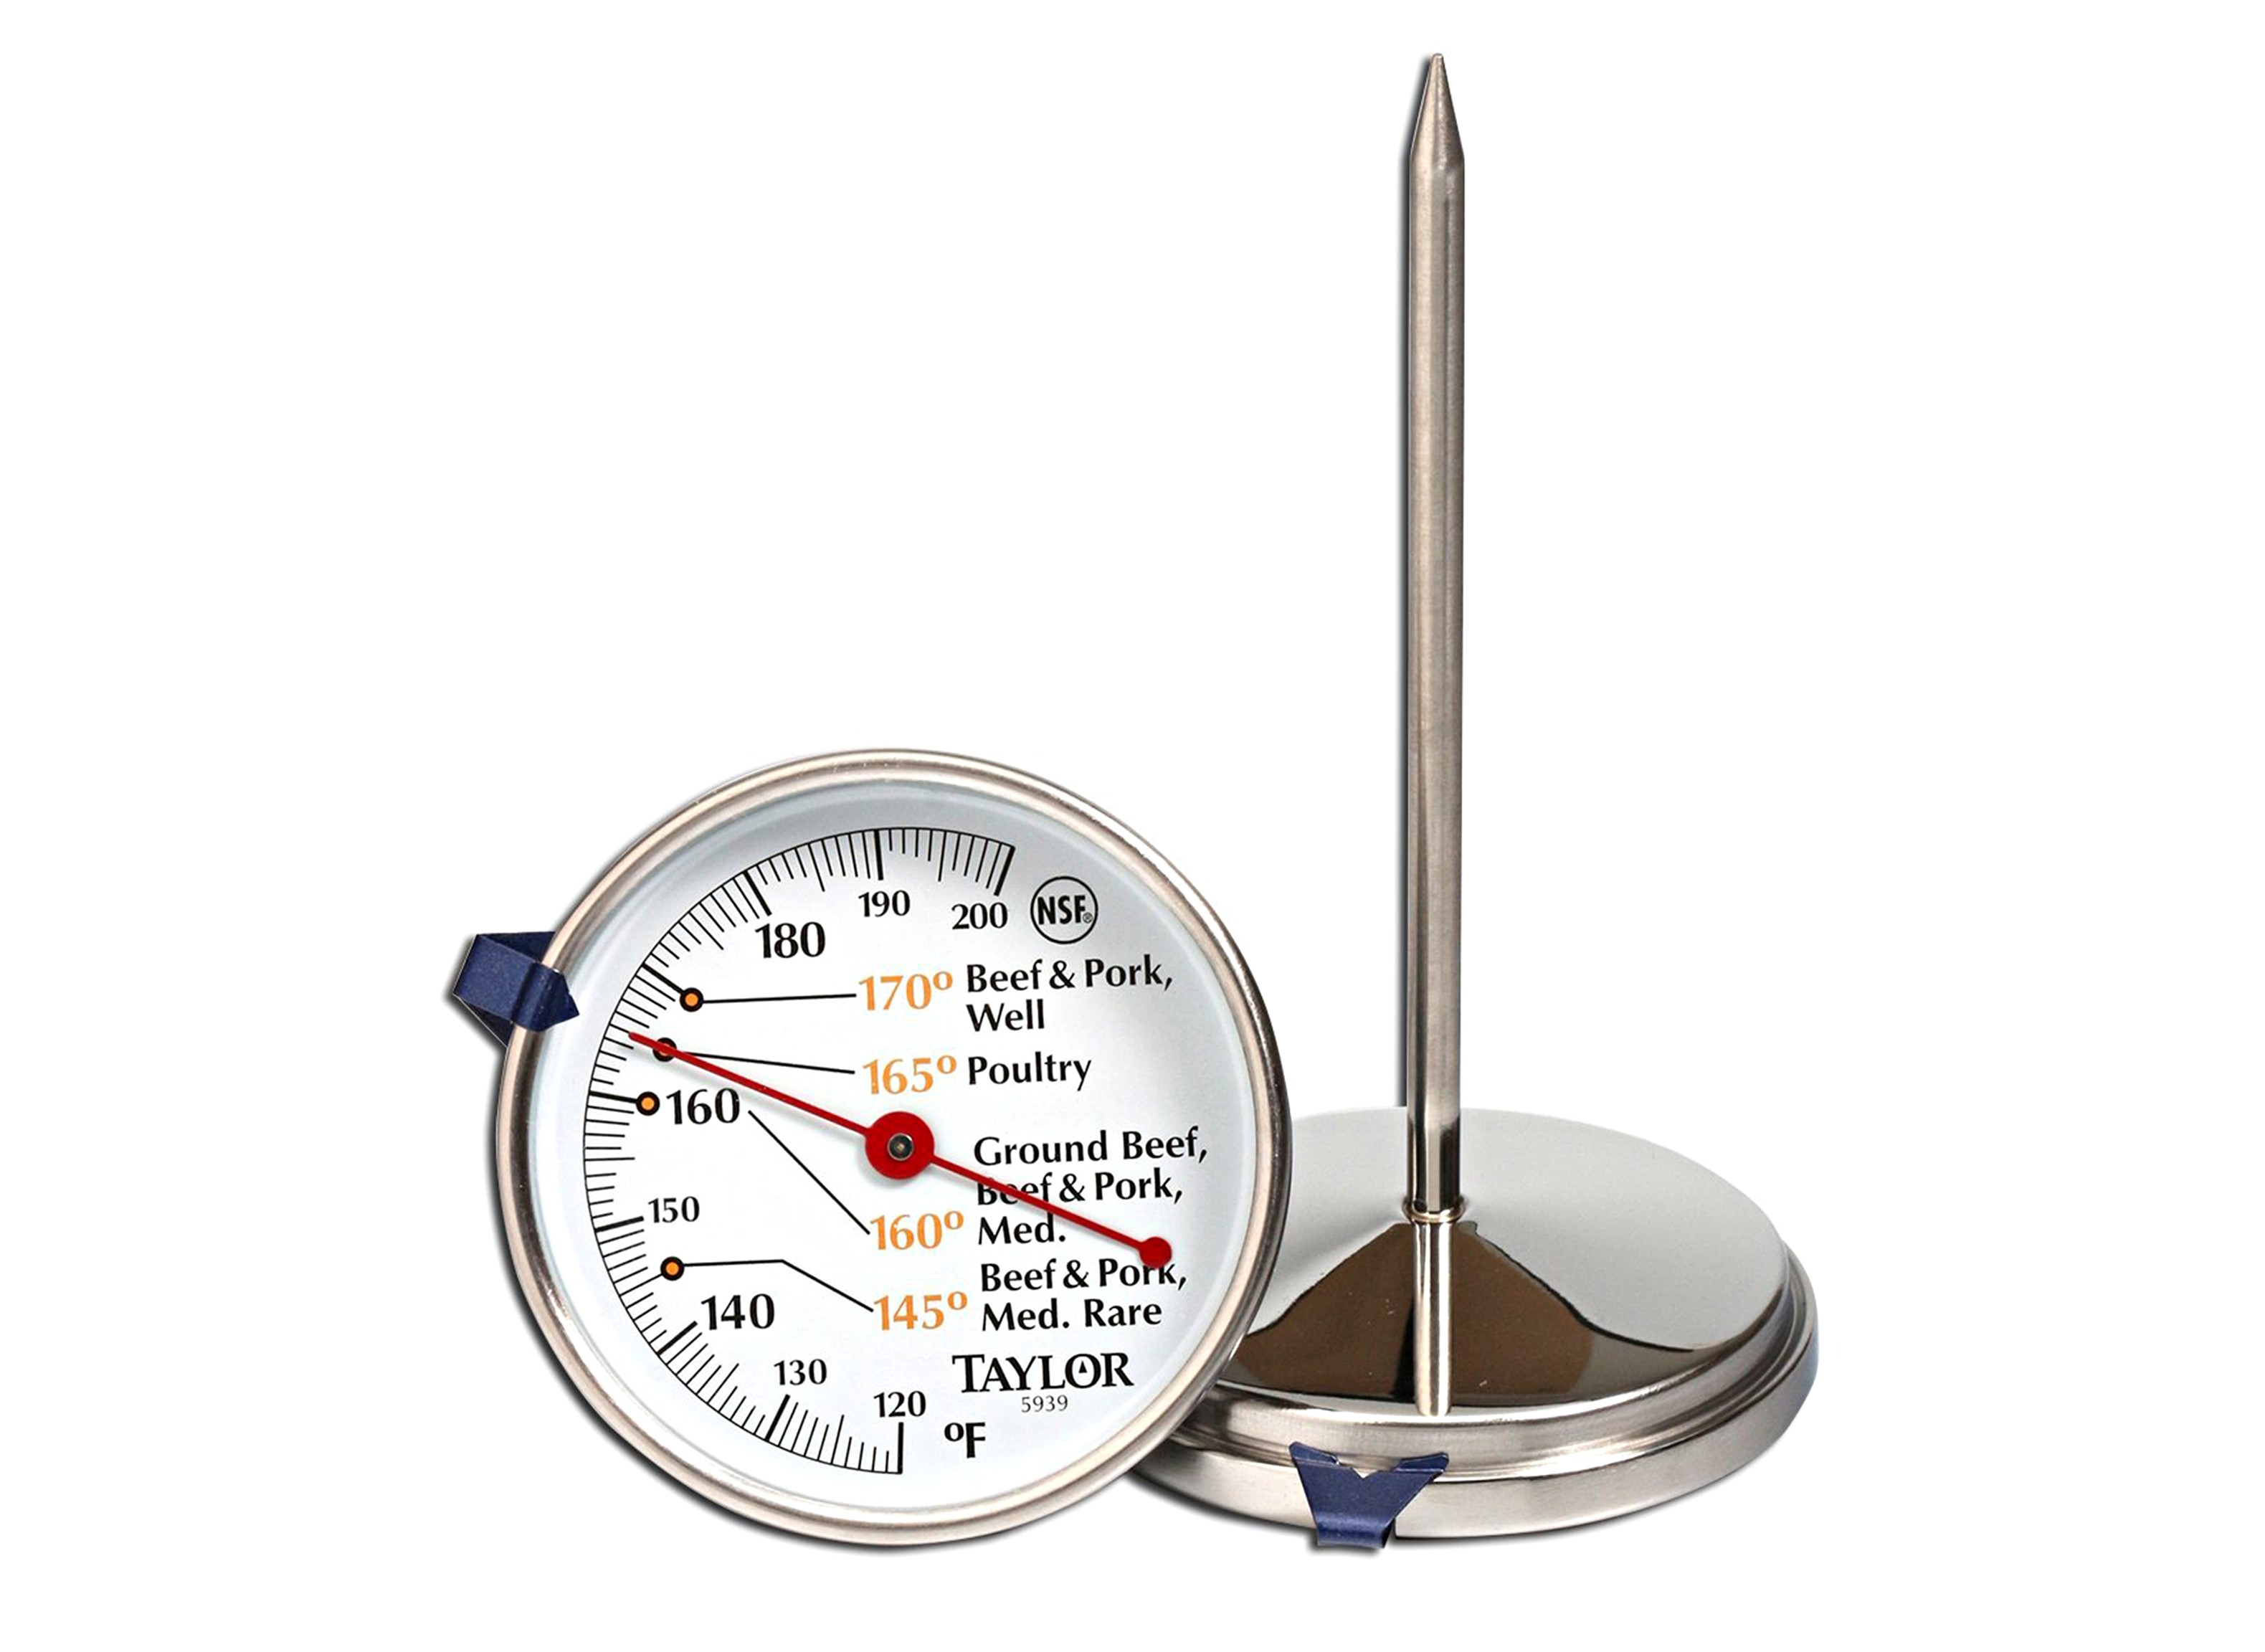 https://crdms.images.consumerreports.org/prod/products/cr/models/231066-meatthermometers-taylor-meatdial593972.jpg